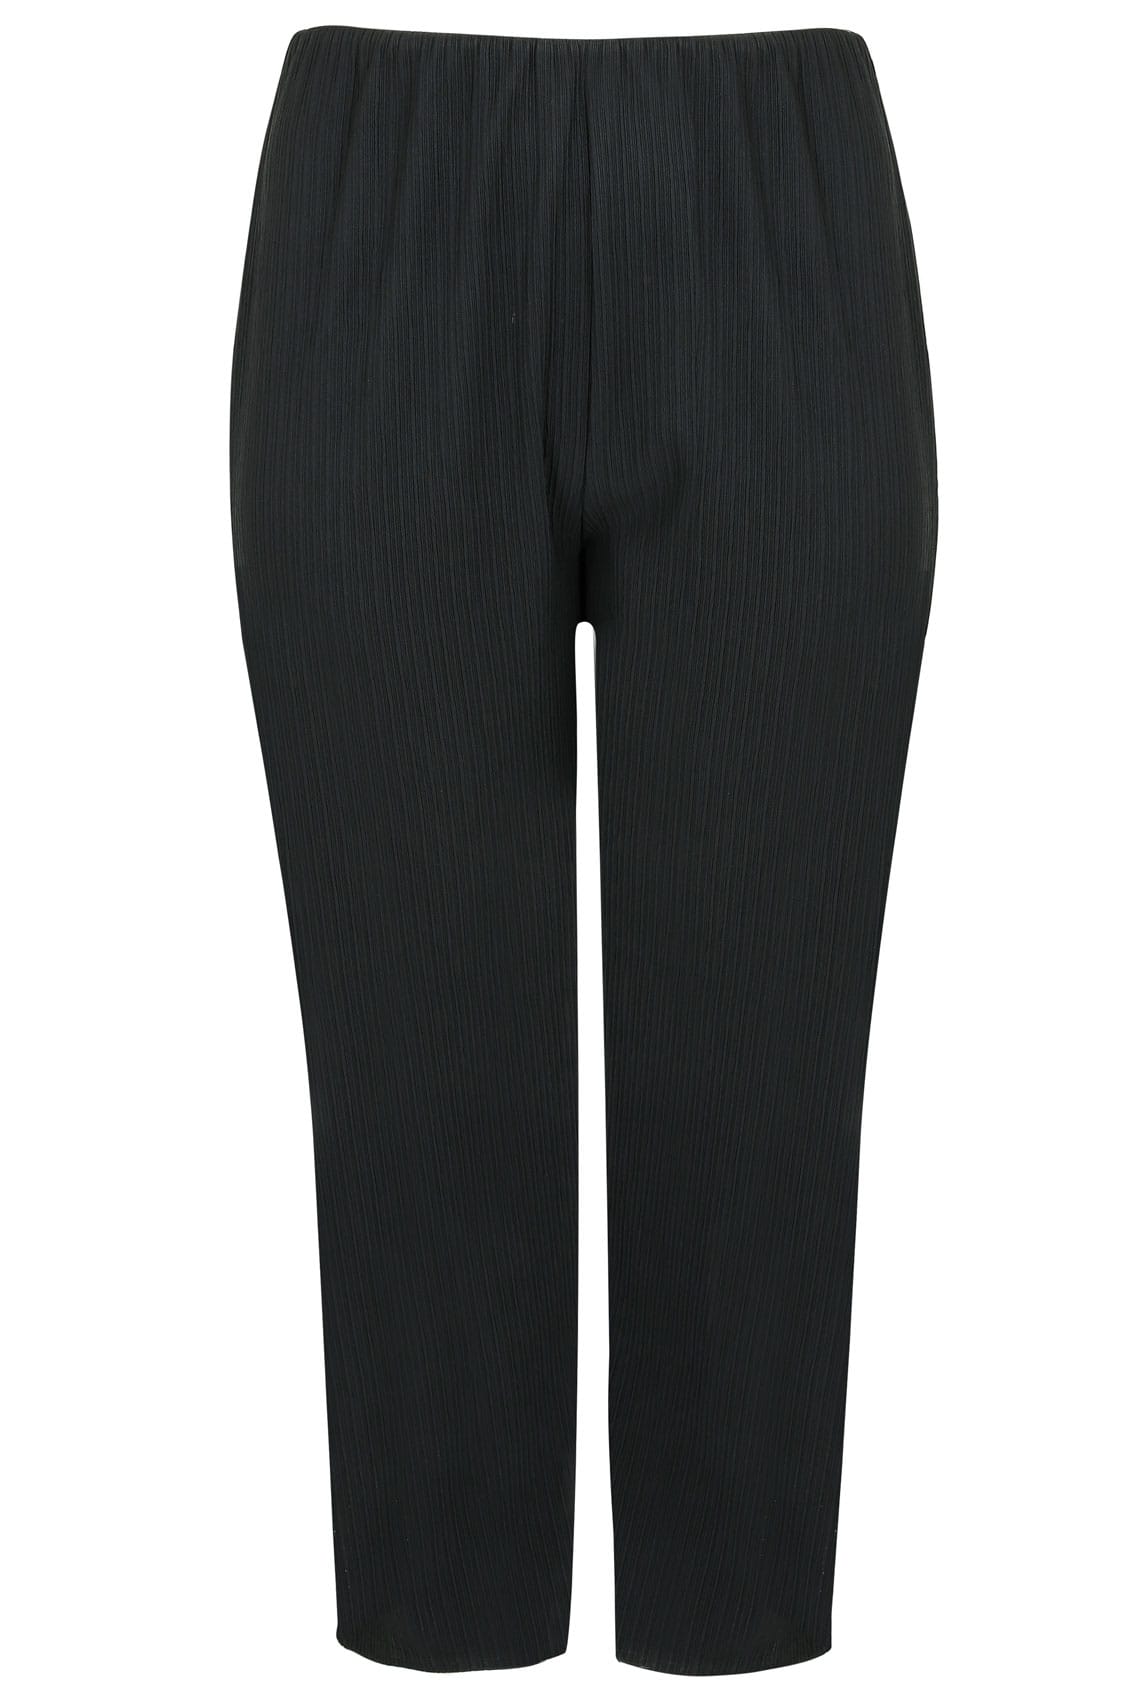 Black Bootleg Stretch Ribbed Trousers, Plus size 16 to 36